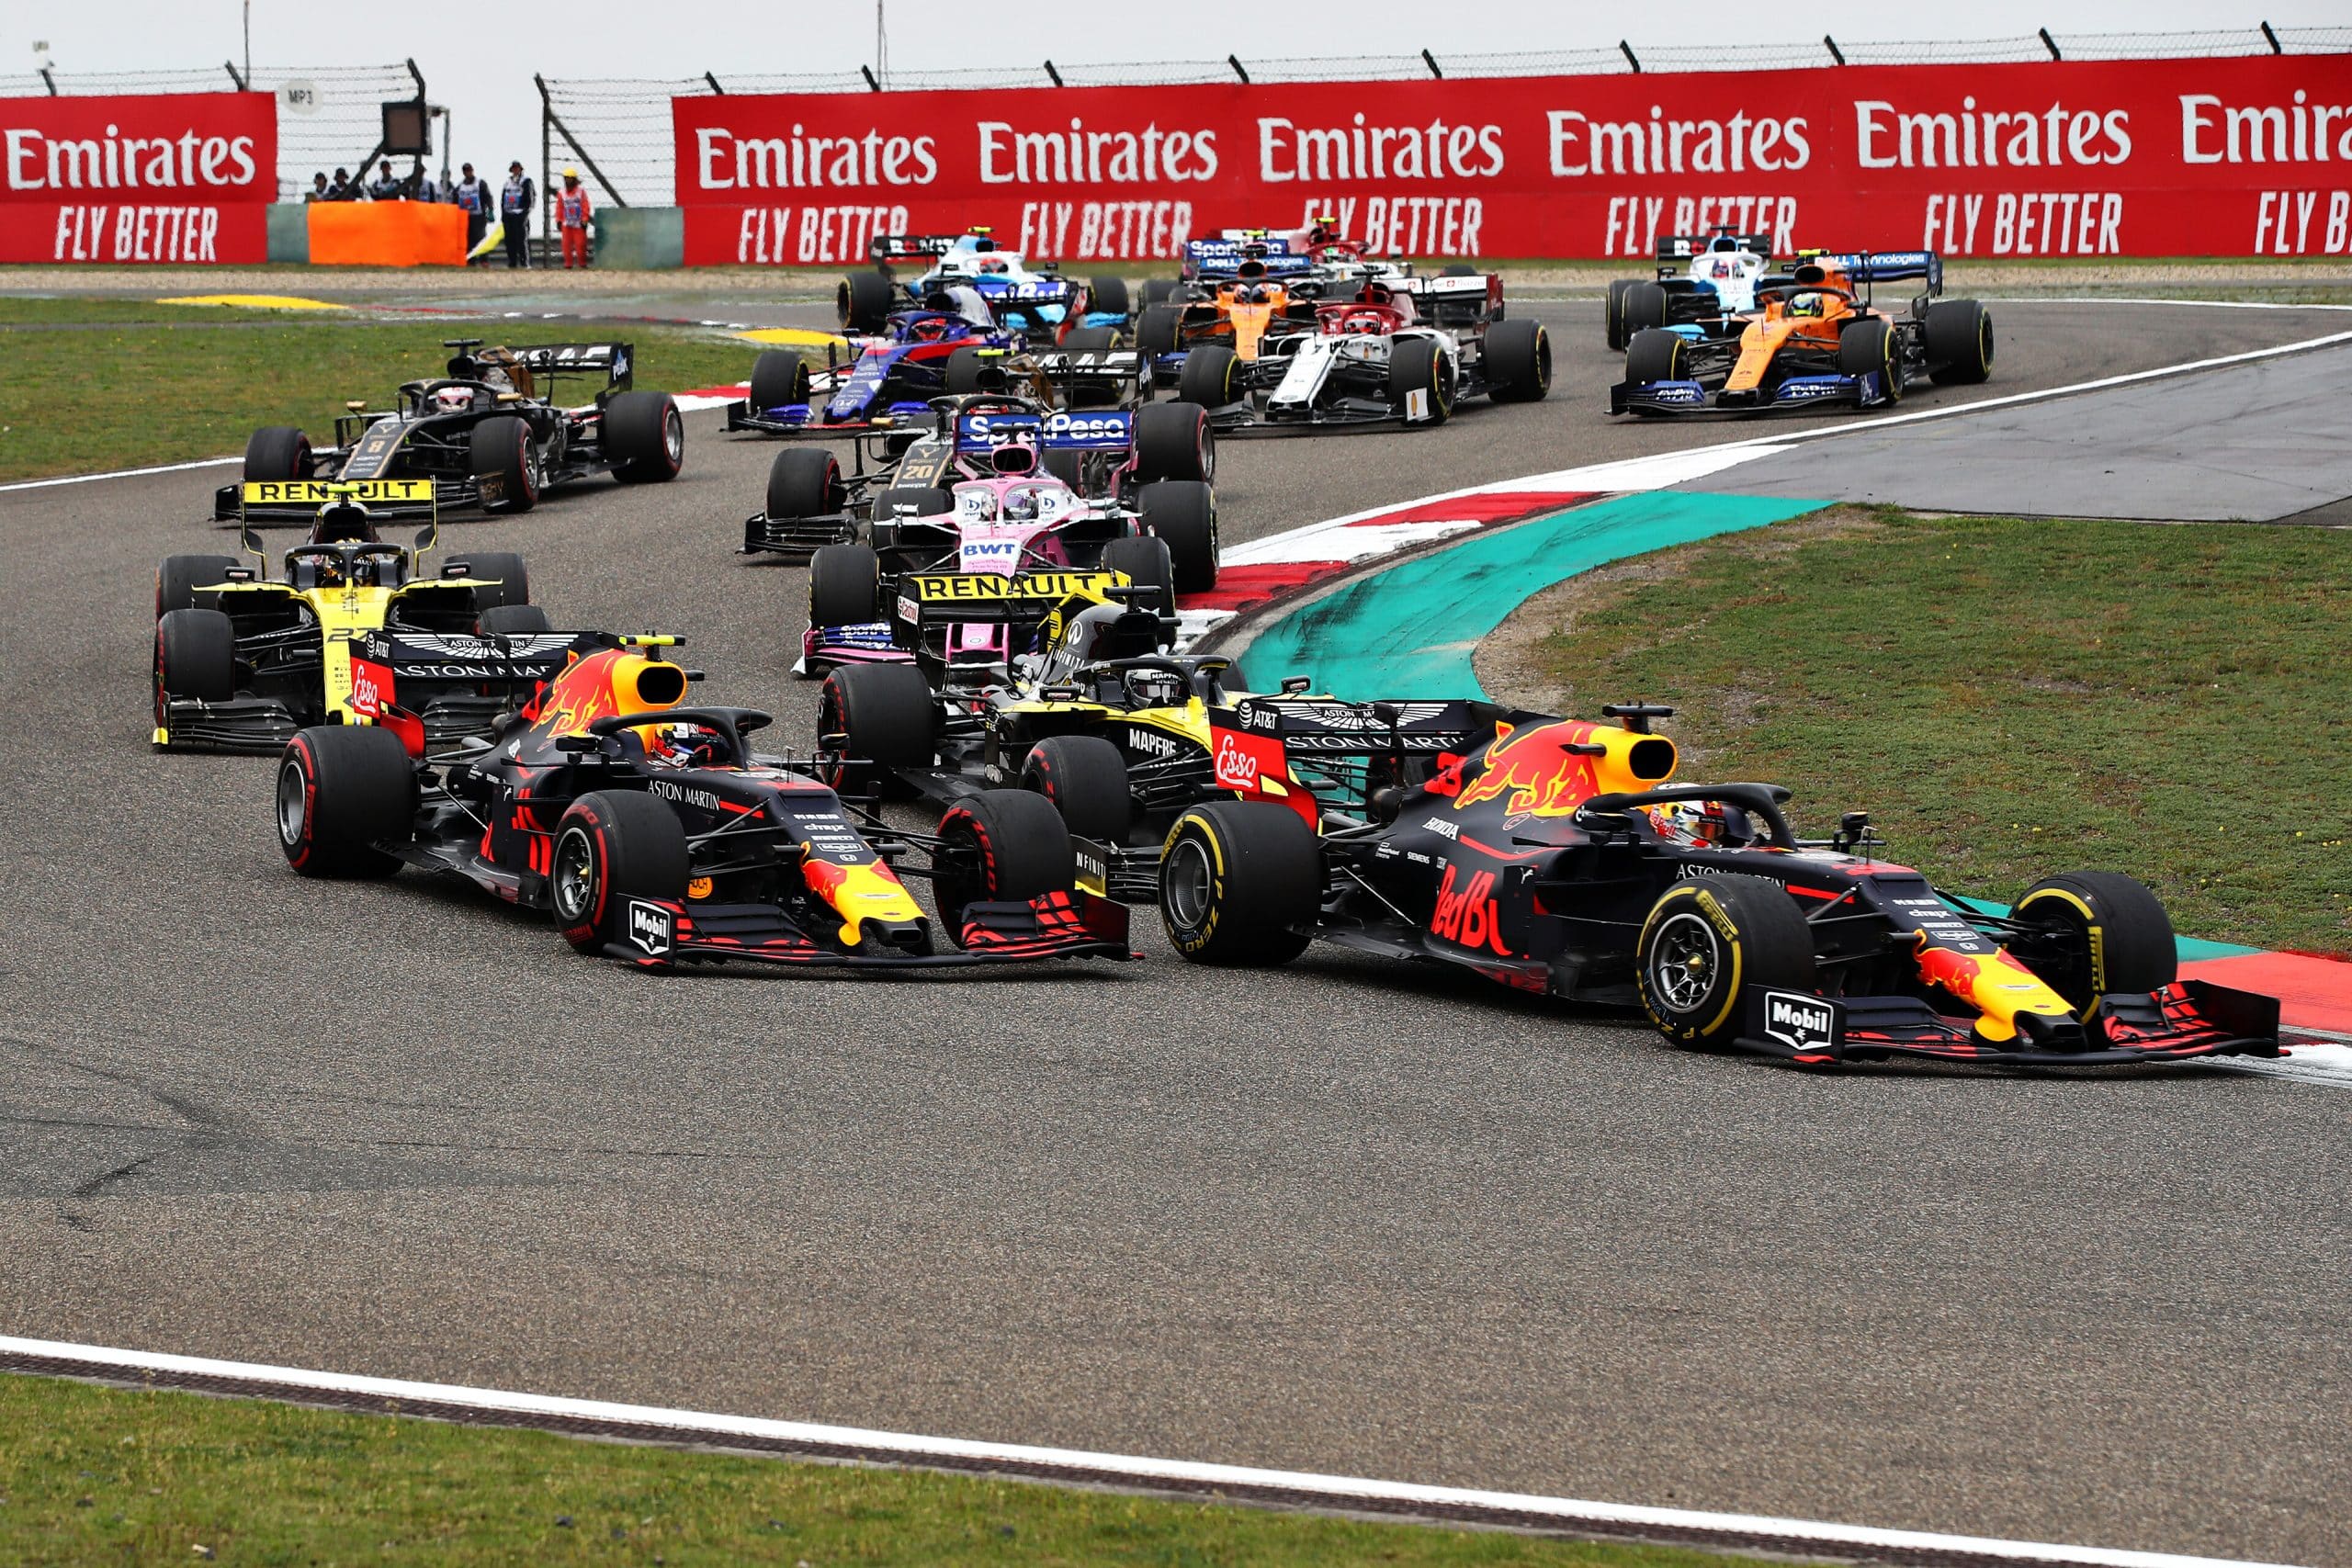 The Chinese GP is being held for the first time in several years